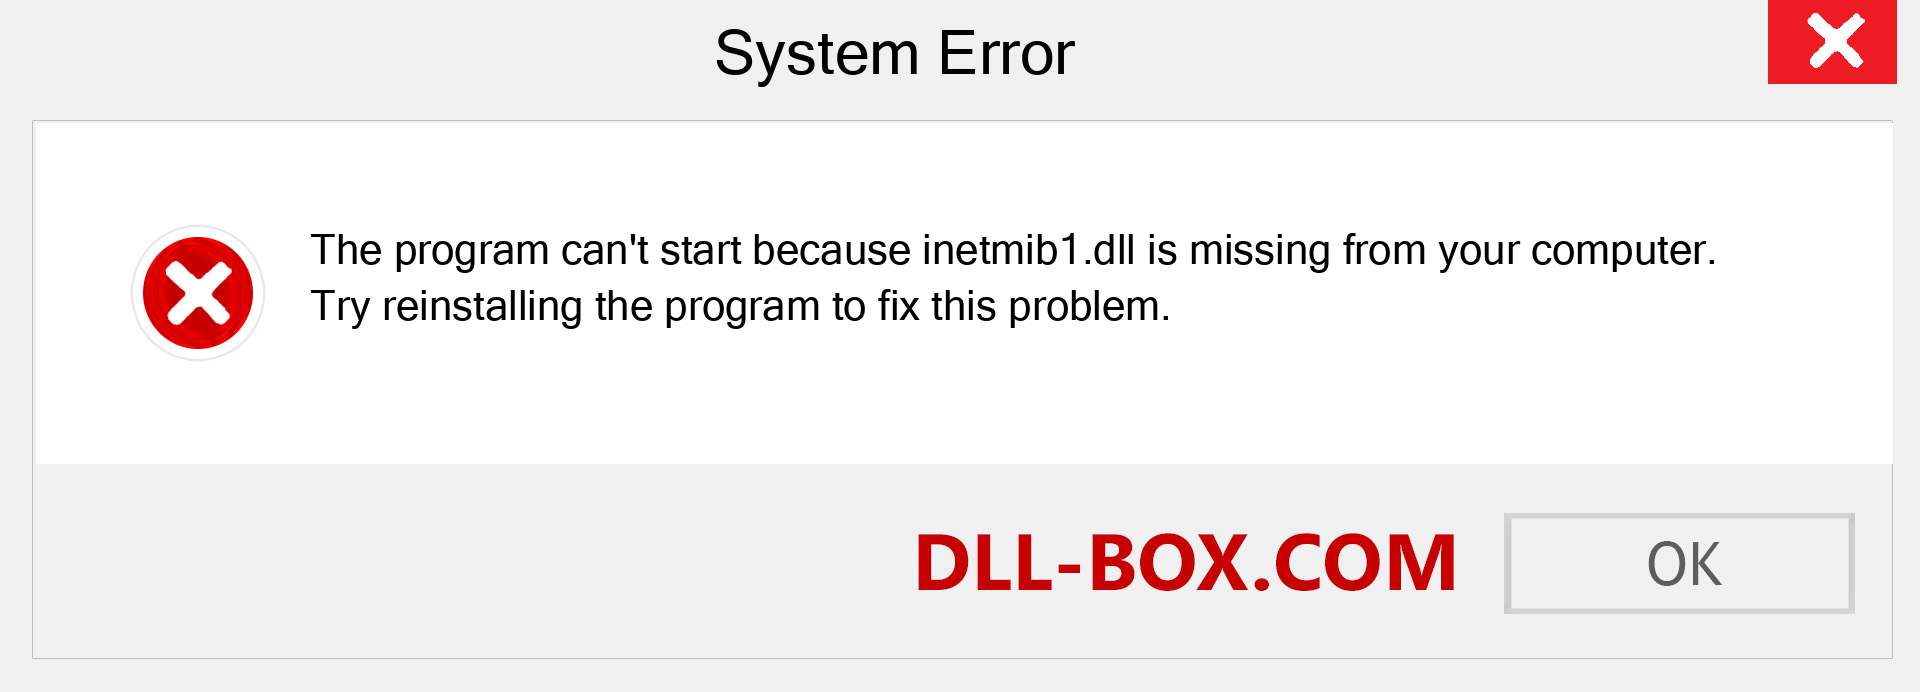  inetmib1.dll file is missing?. Download for Windows 7, 8, 10 - Fix  inetmib1 dll Missing Error on Windows, photos, images